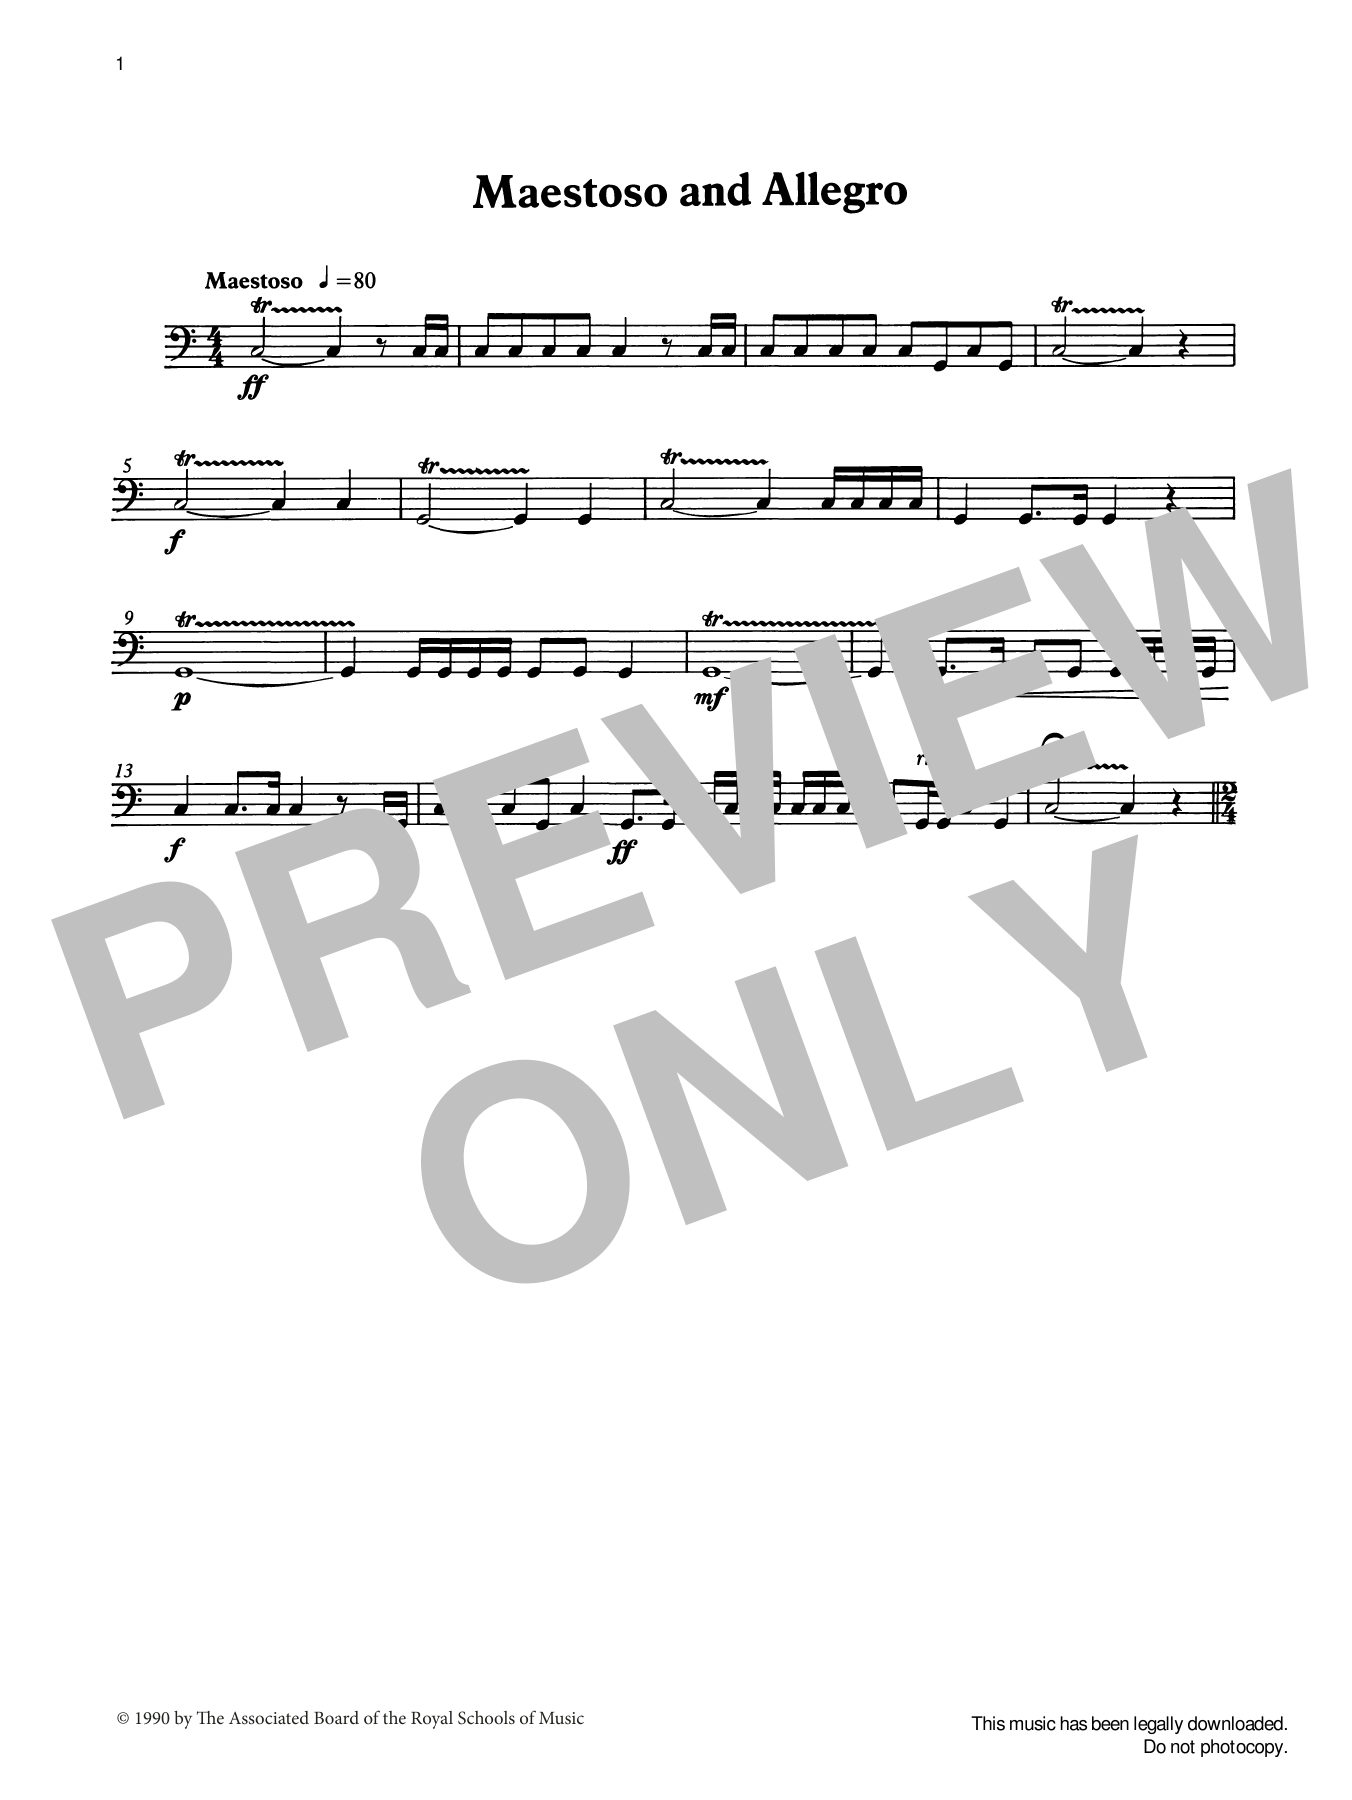 Download Ian Wright Maestoso and Allegro from Graded Music Sheet Music